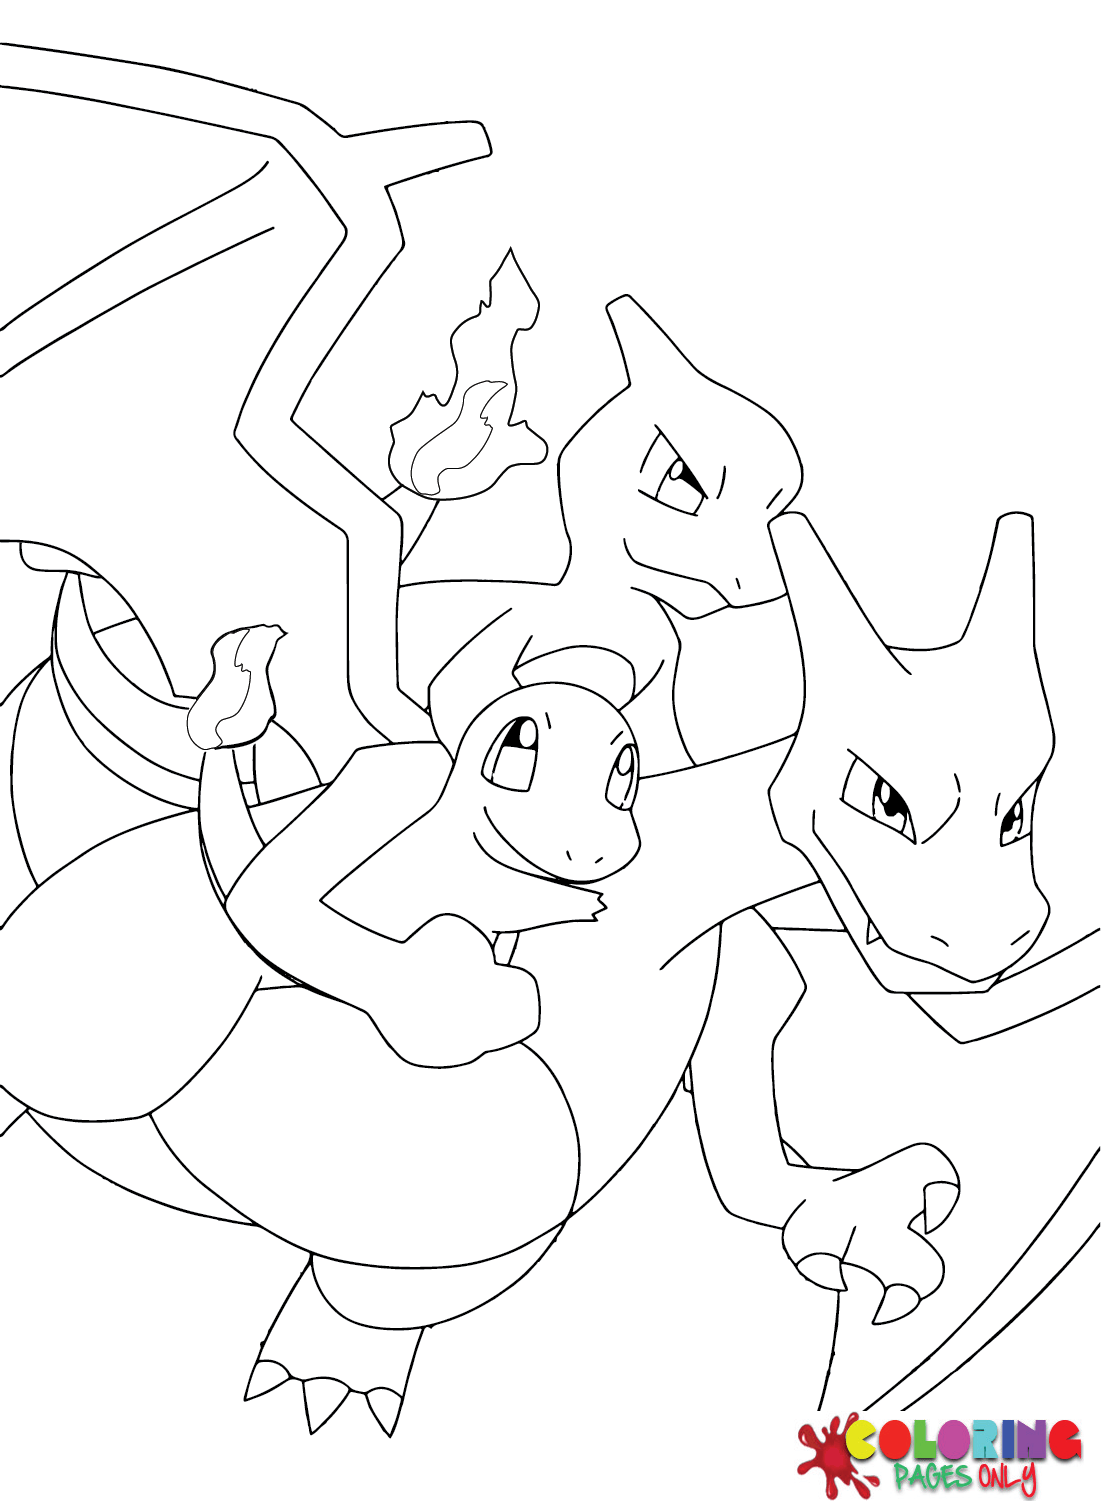 Charizard Evolution Coloring Pages